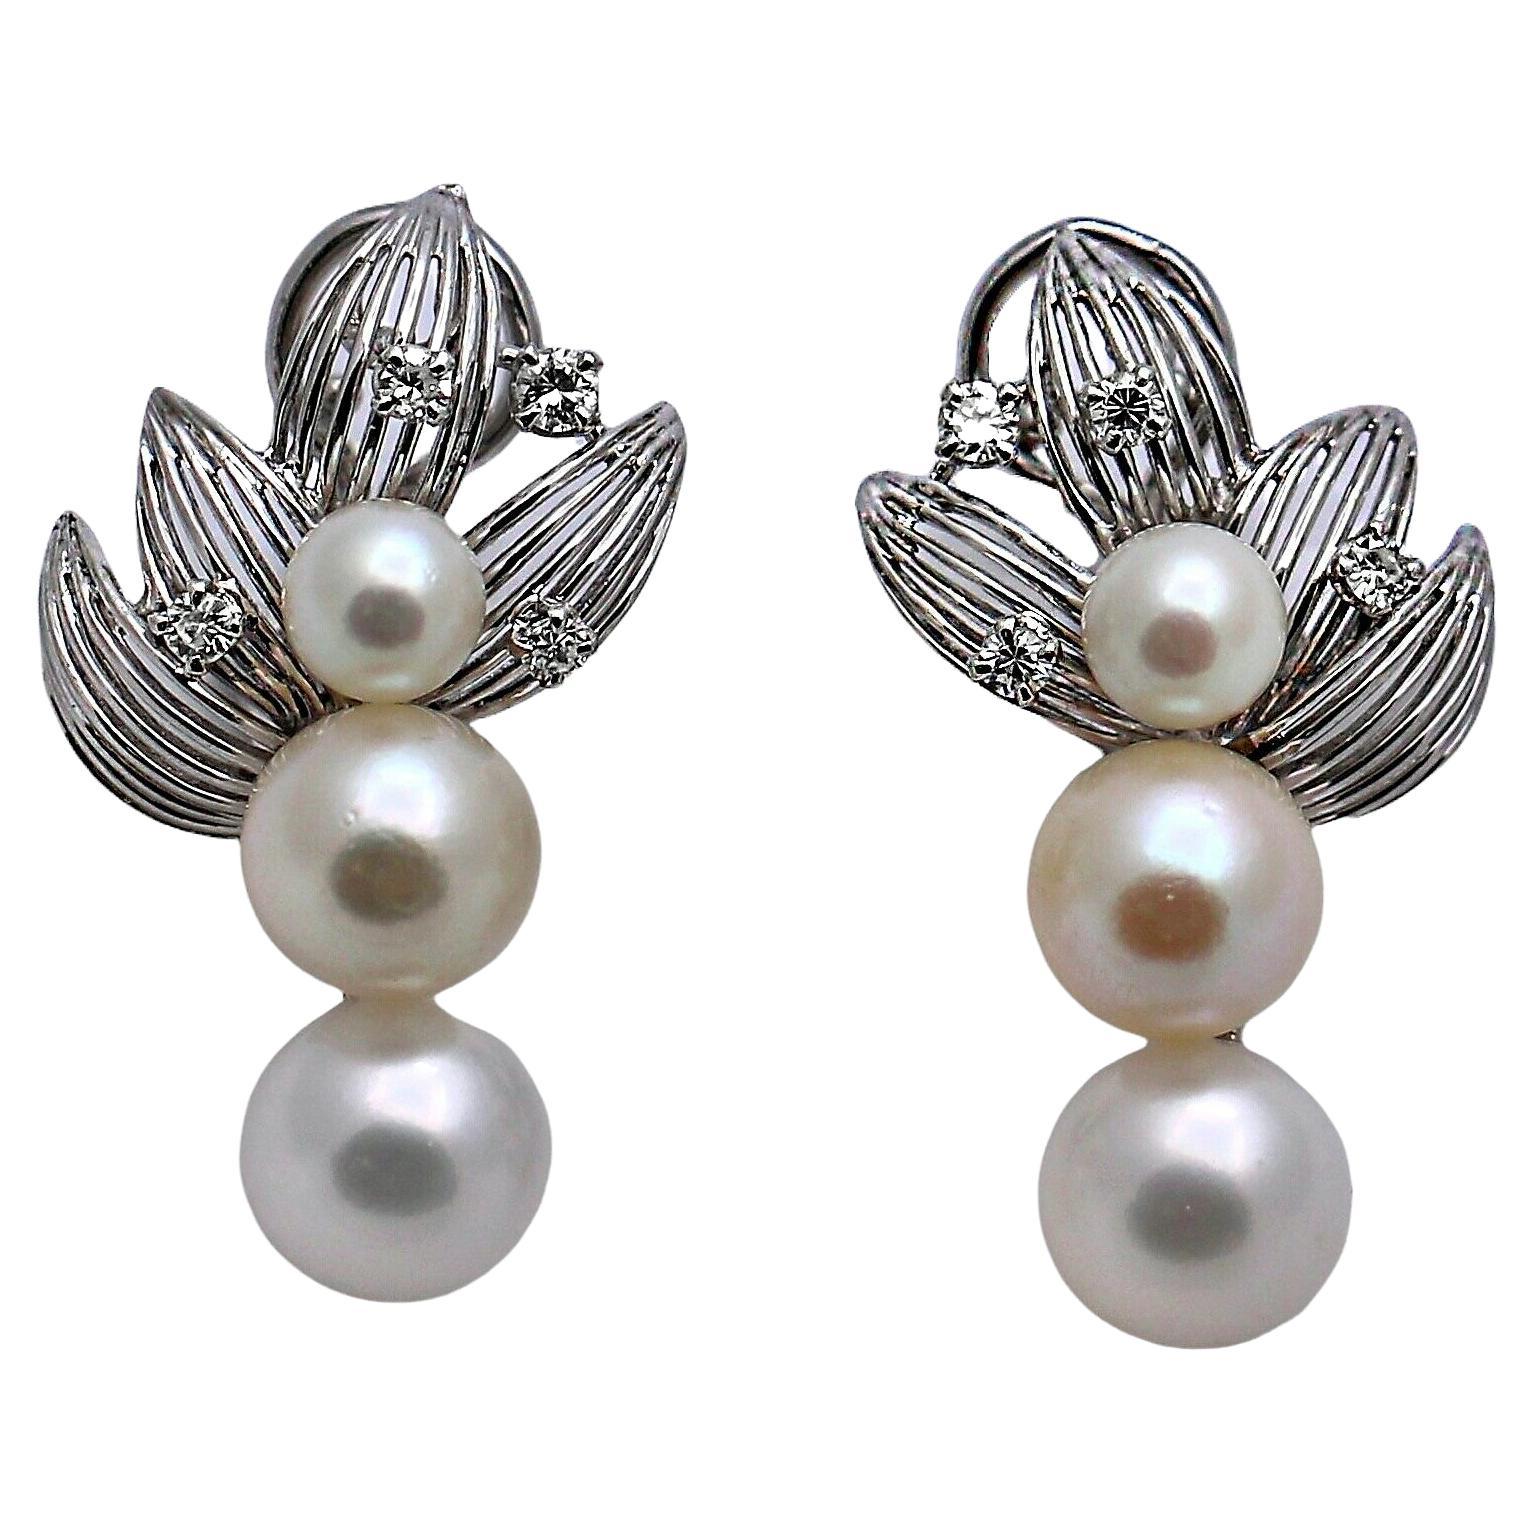 French Mid-20th Century 18K White Gold, Pearl and Diamond Earrings For Sale